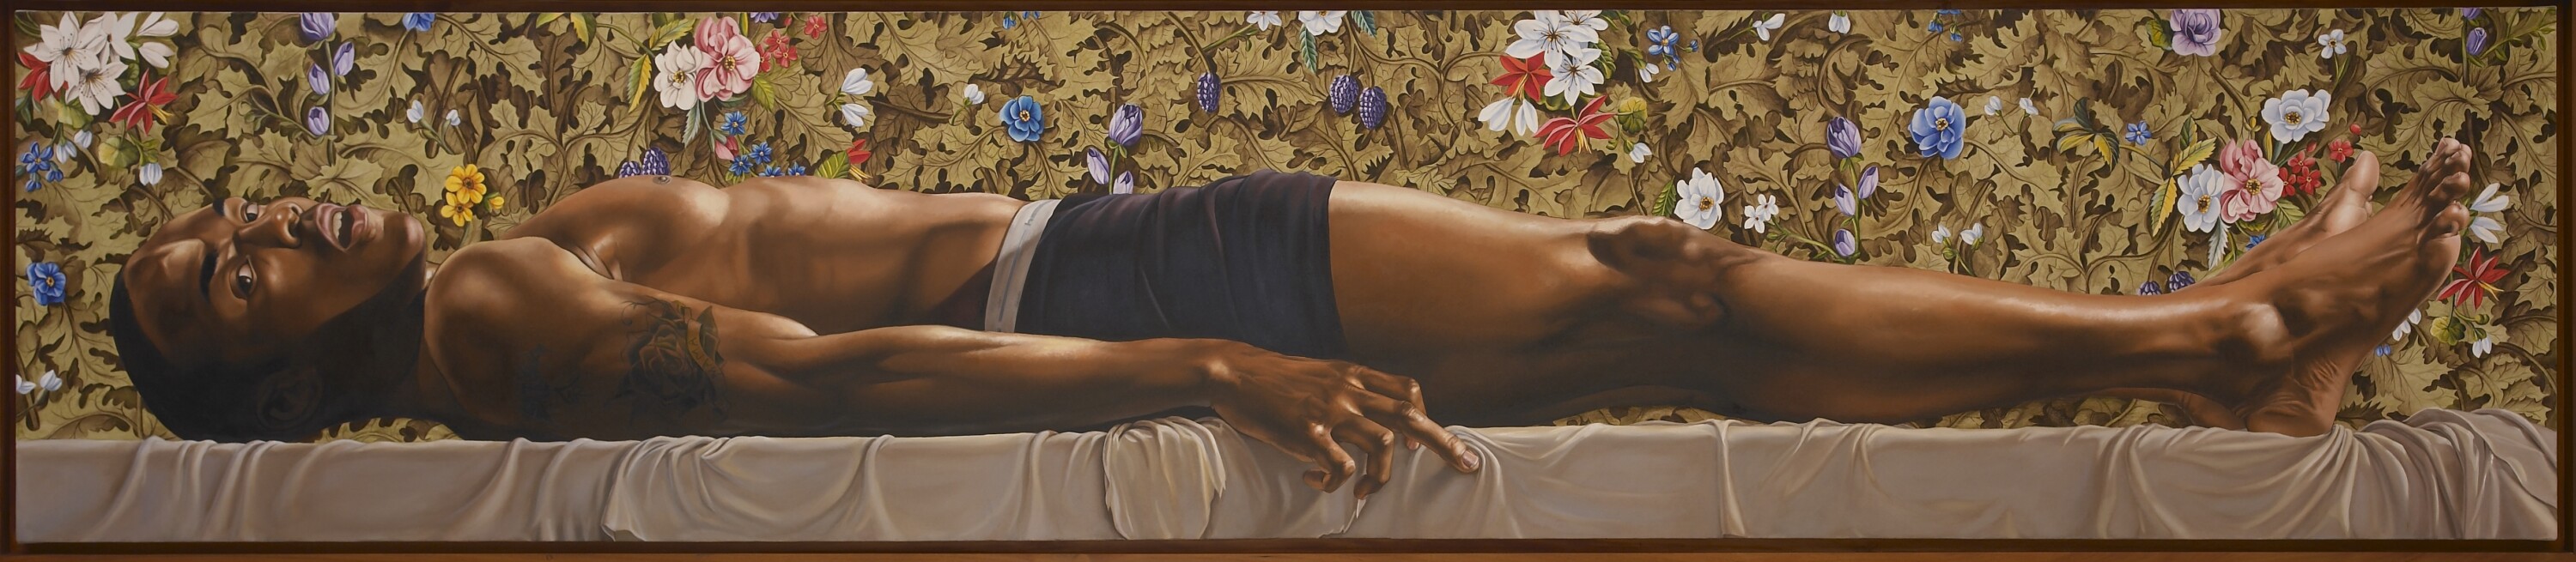 kehindewiley_a new republic_The Dead Christ in the Tomb